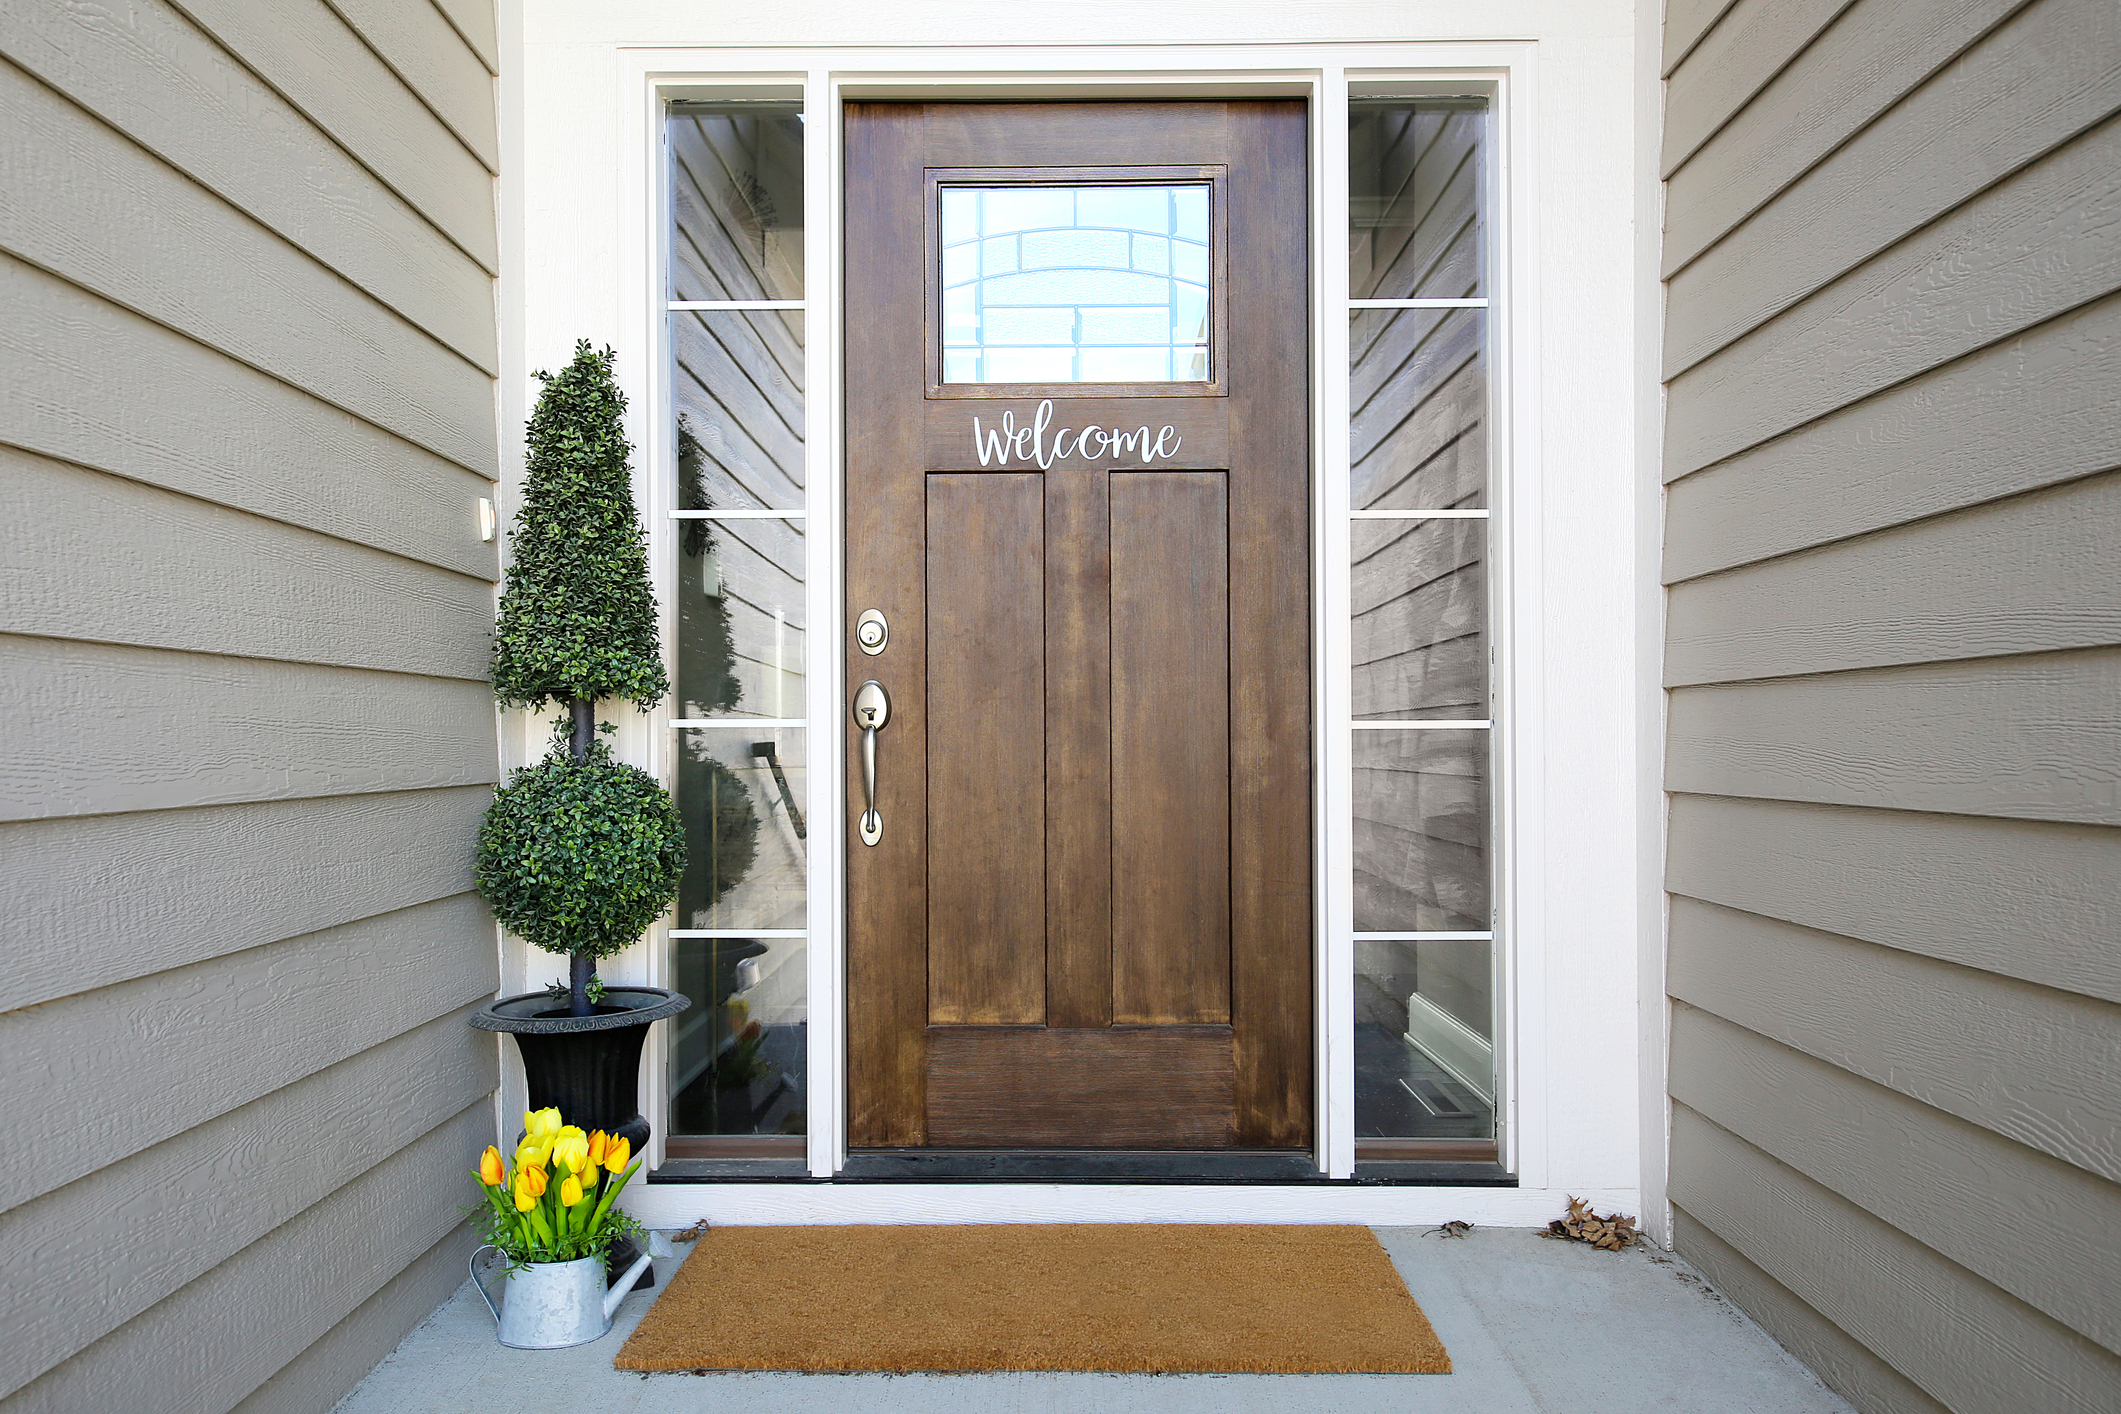 9 basics to consider before shopping for a new door